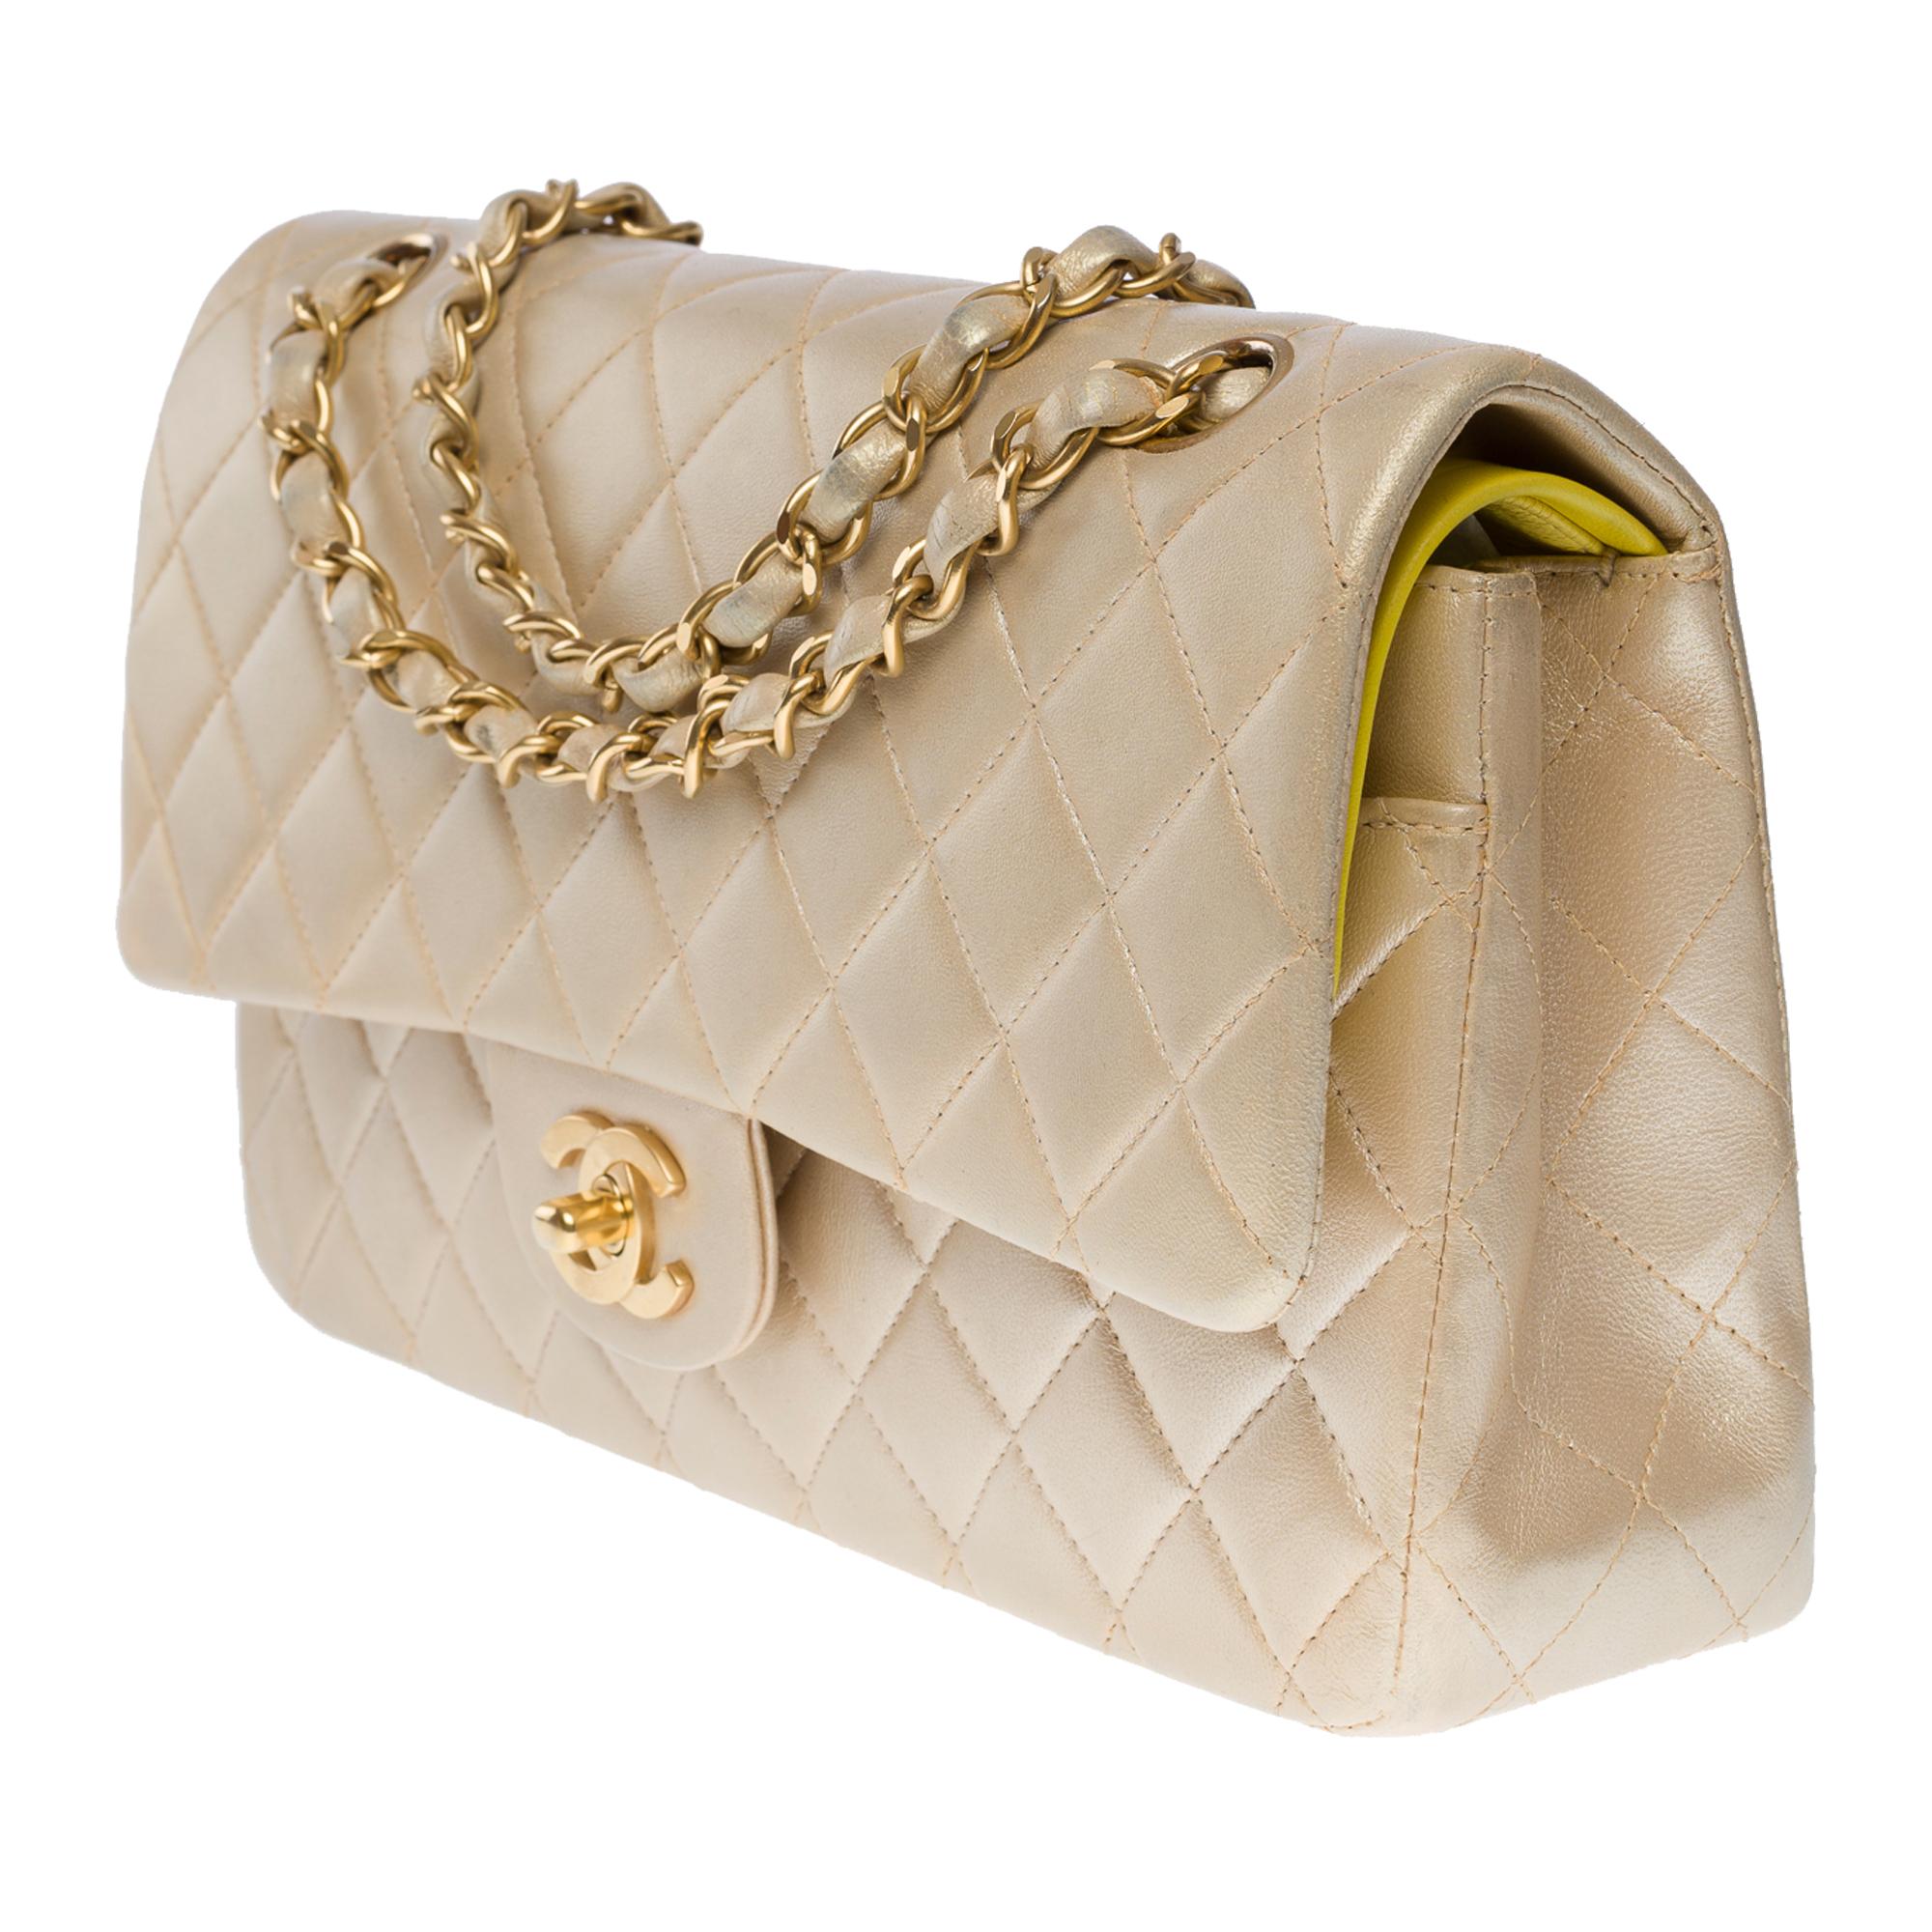 Women's Chanel Timeless Medium double flap bag in iridescent gold quilted lambskin , GHW